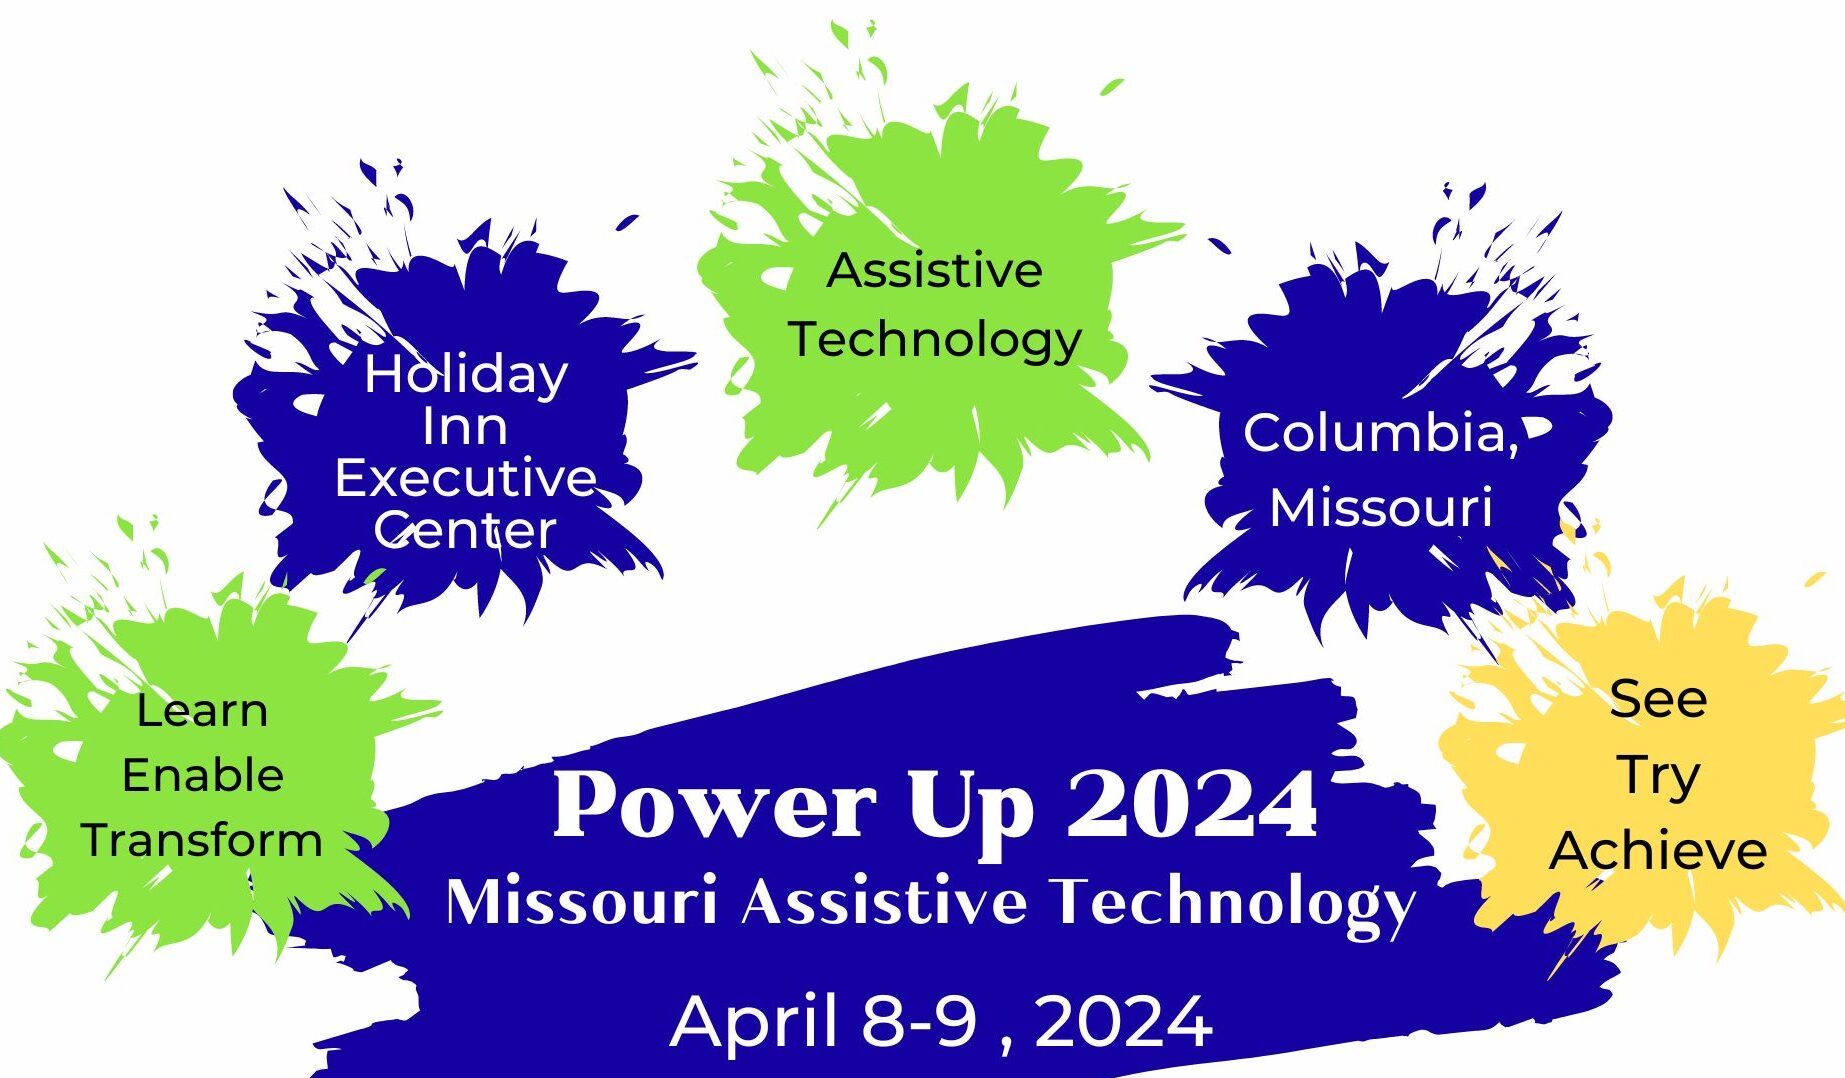 Power Up 2024 Missouri Assistive Technology, Columbia, MO at Holiday Inn Executive Center, Learn, Enable, Transform, See, Try and Achieve